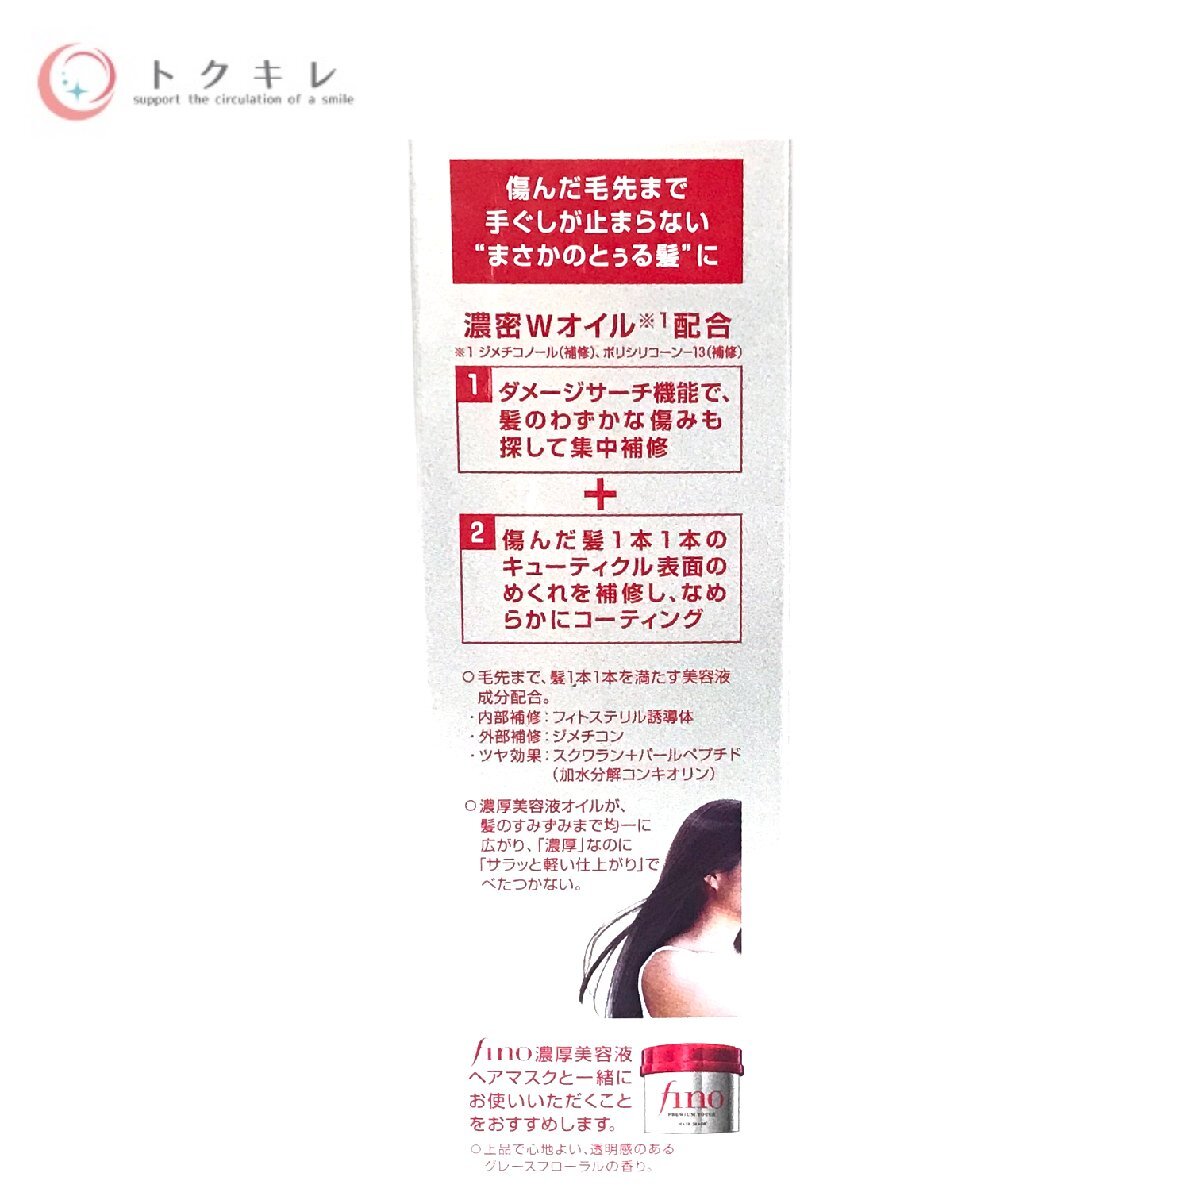 !1 jpy start free shipping Shiseido fi-no premium Touch permeation beauty care liquid he AOI rud 70mL large amount 54 point set all unopened resale . please amazon